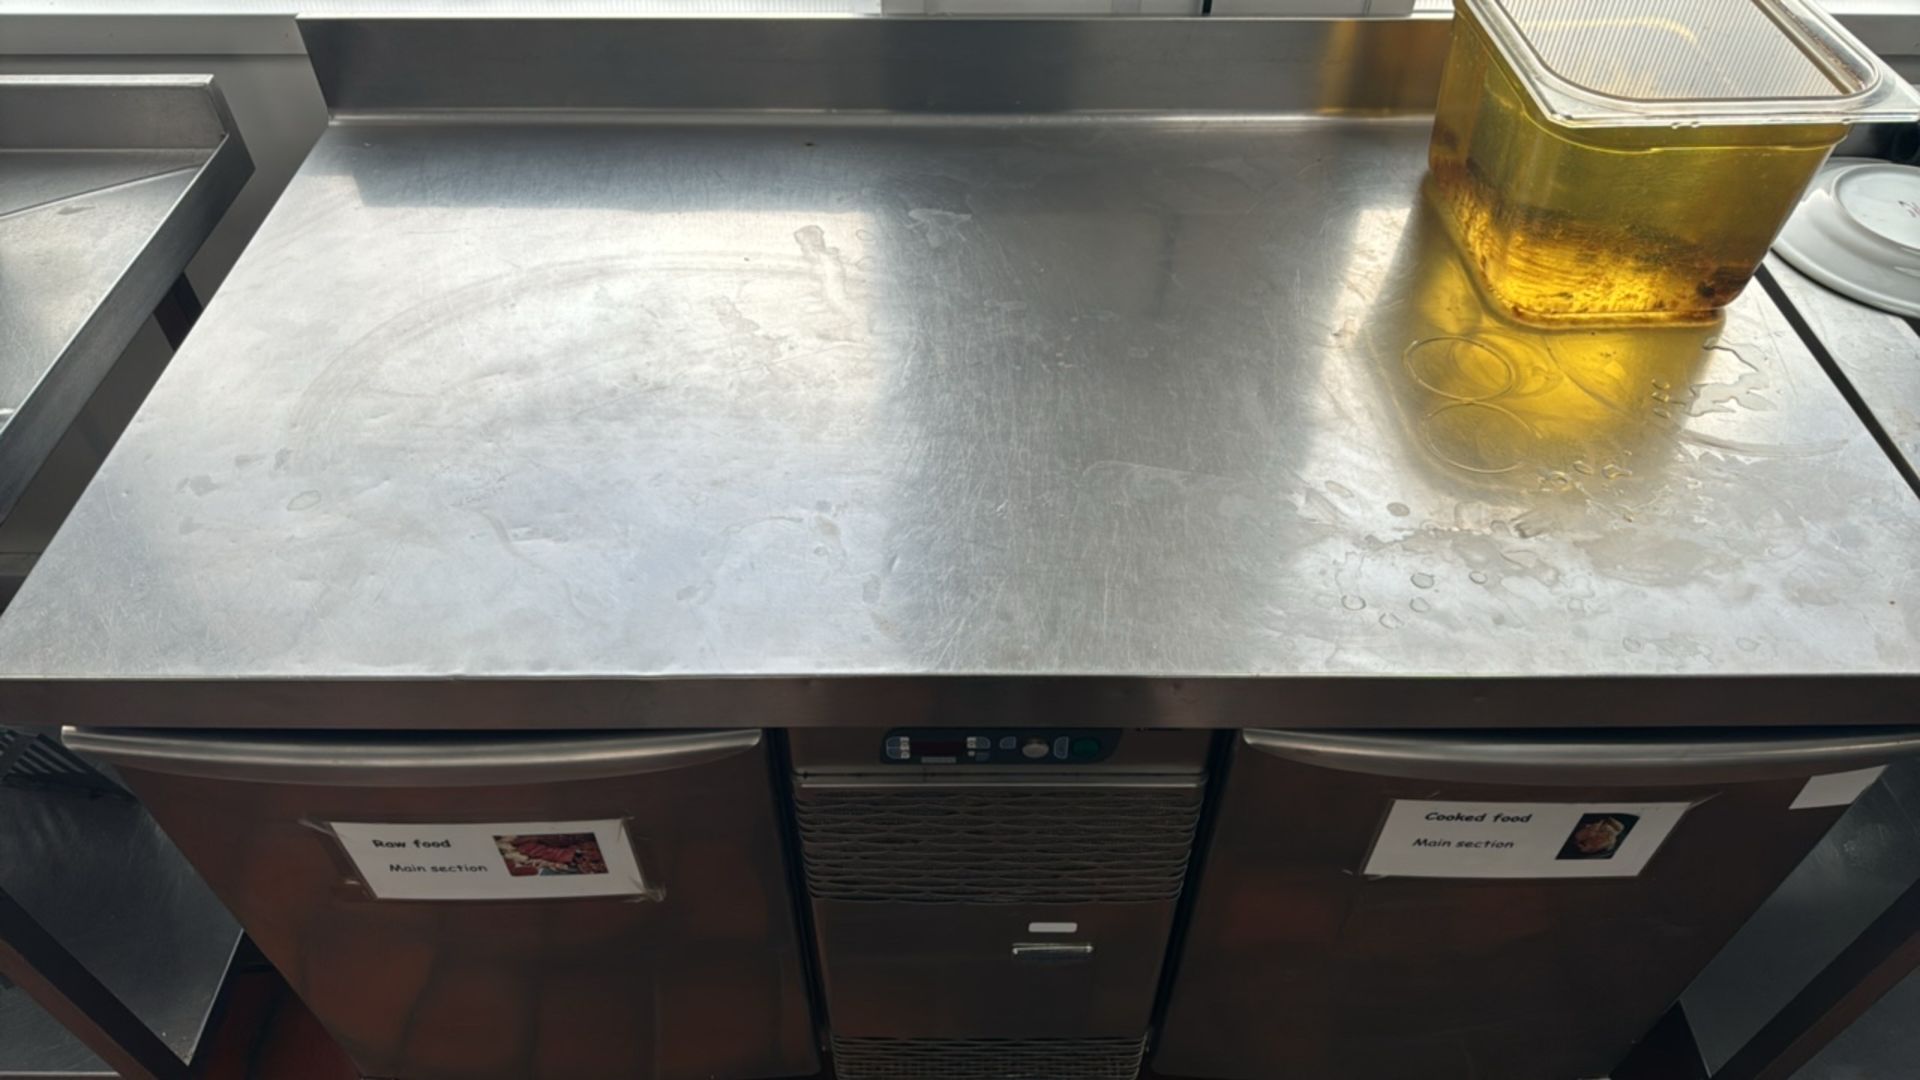 Electrolux Stainless Steel Preparation Unit With Under Counter Fridges - Image 3 of 6